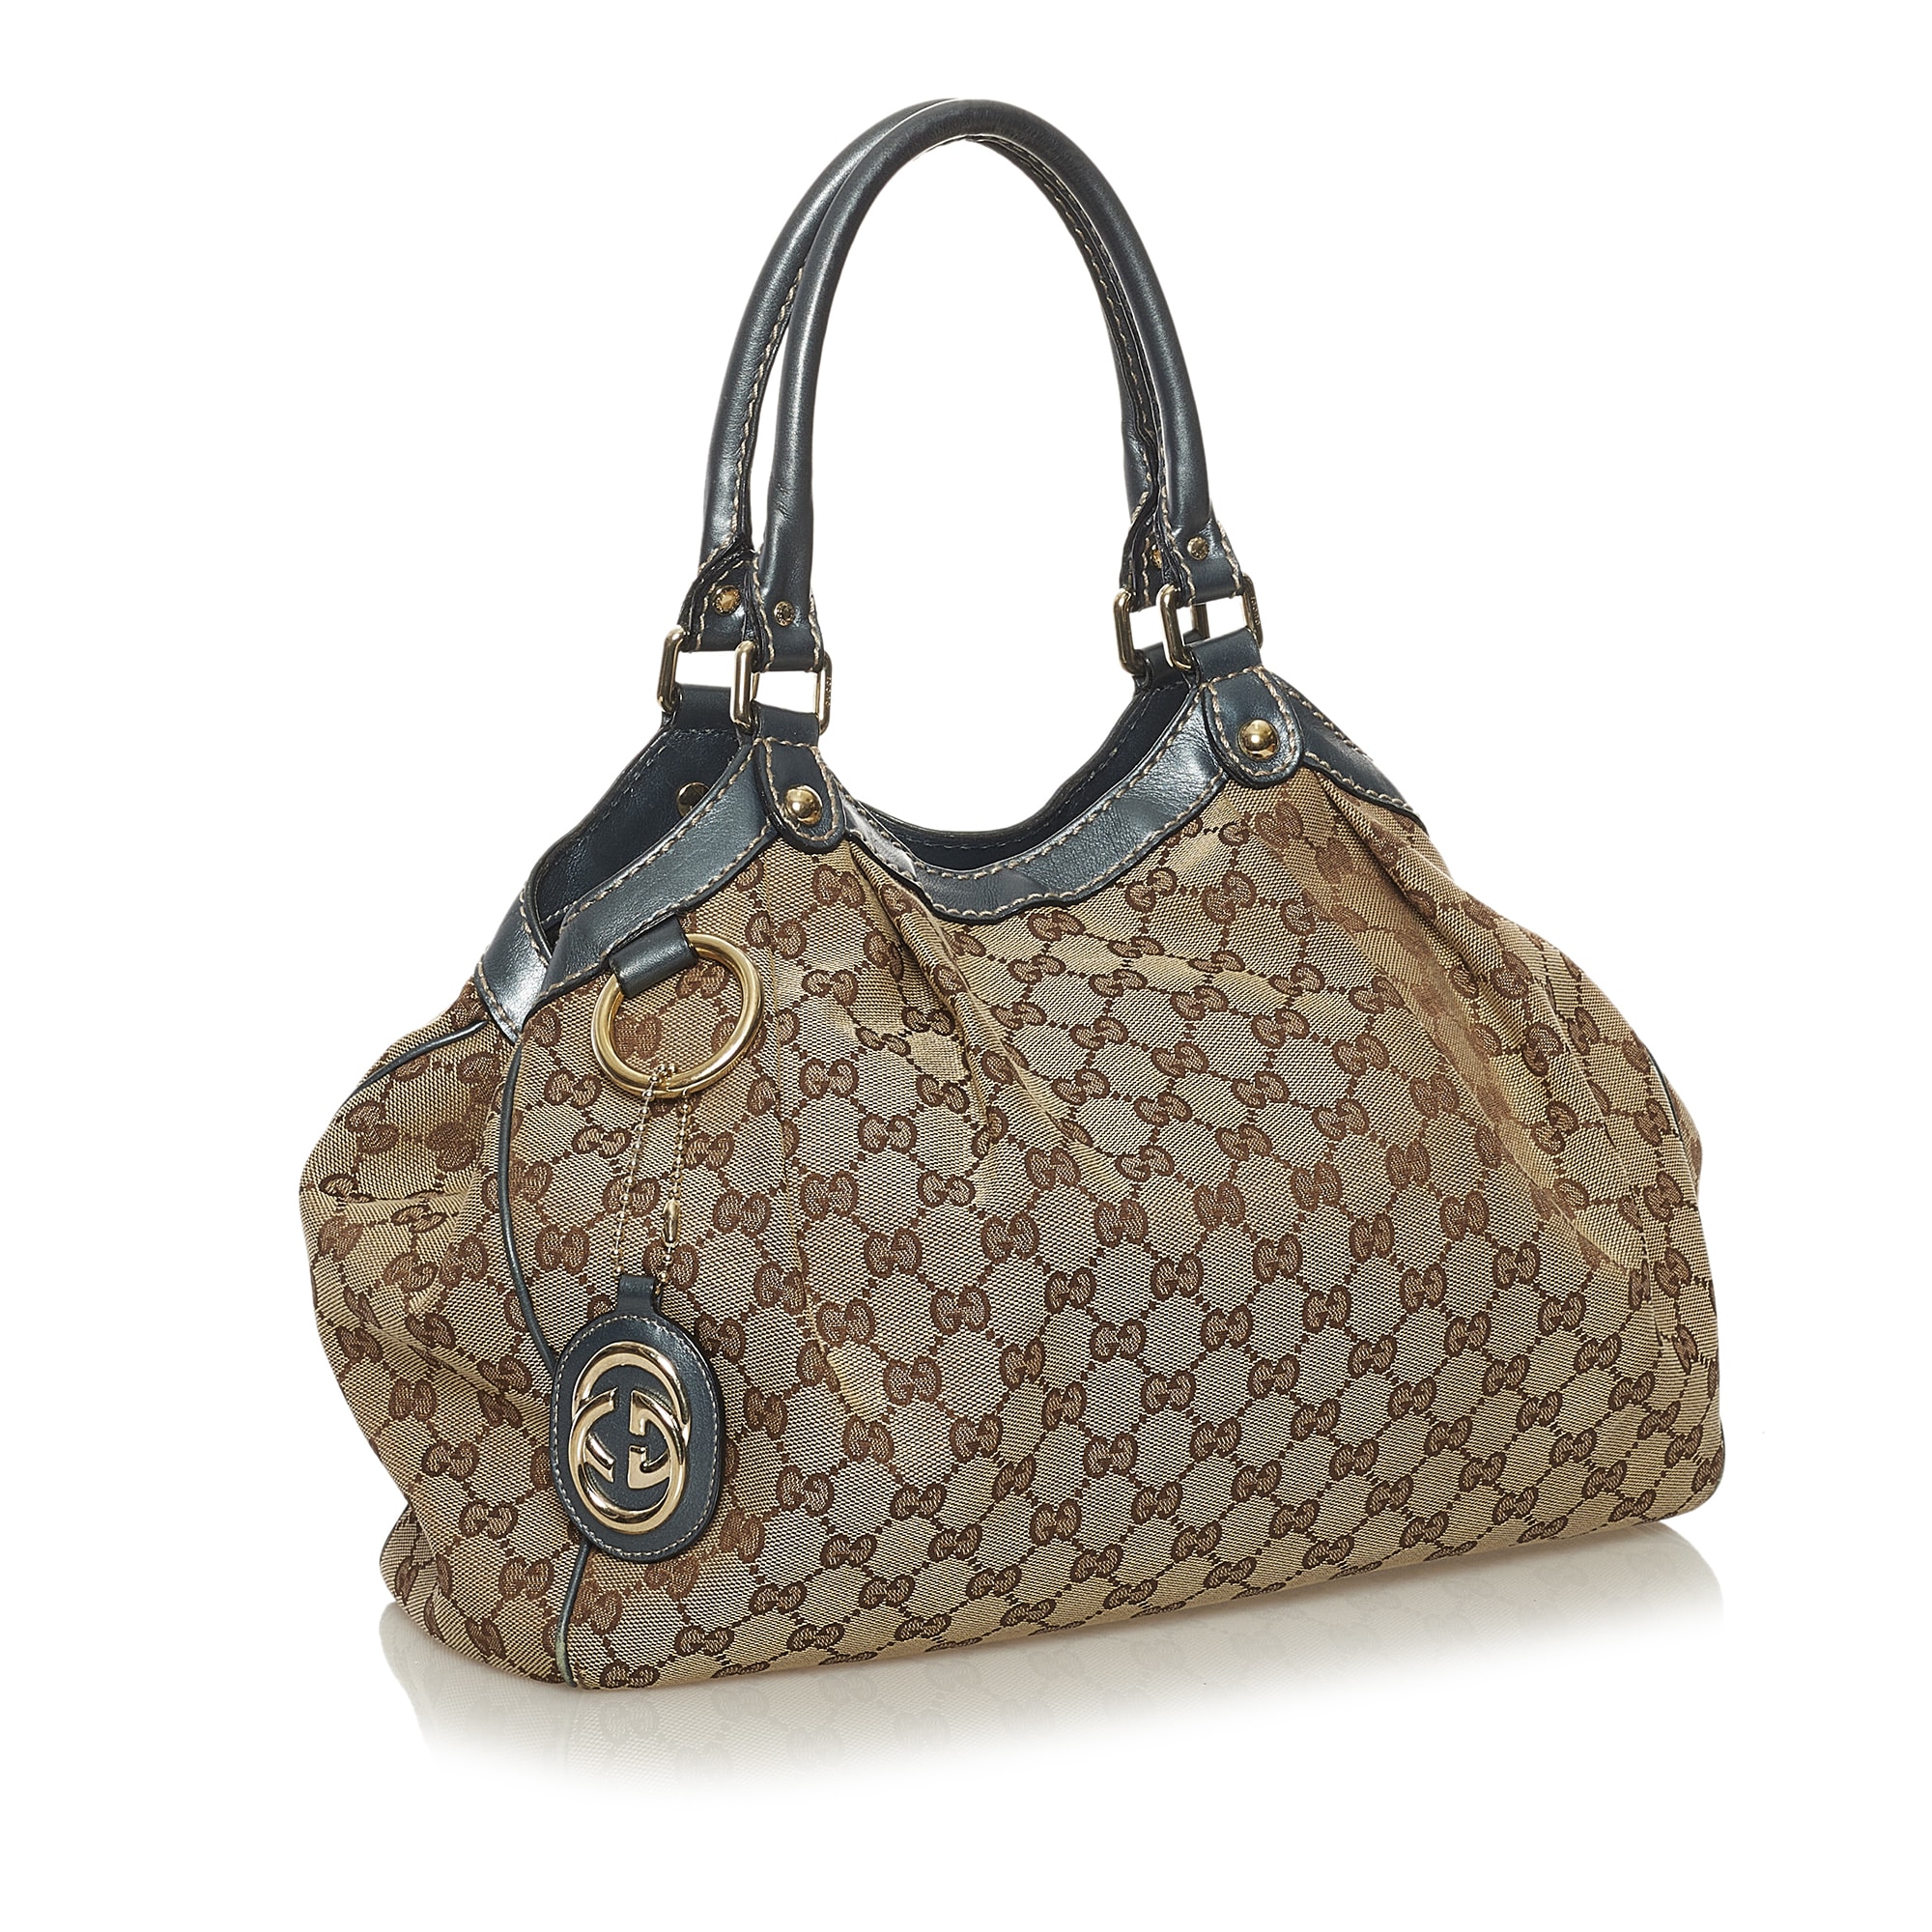 Gucci Gg Canvas Sukey Tote Bag, ONESIZE, beige